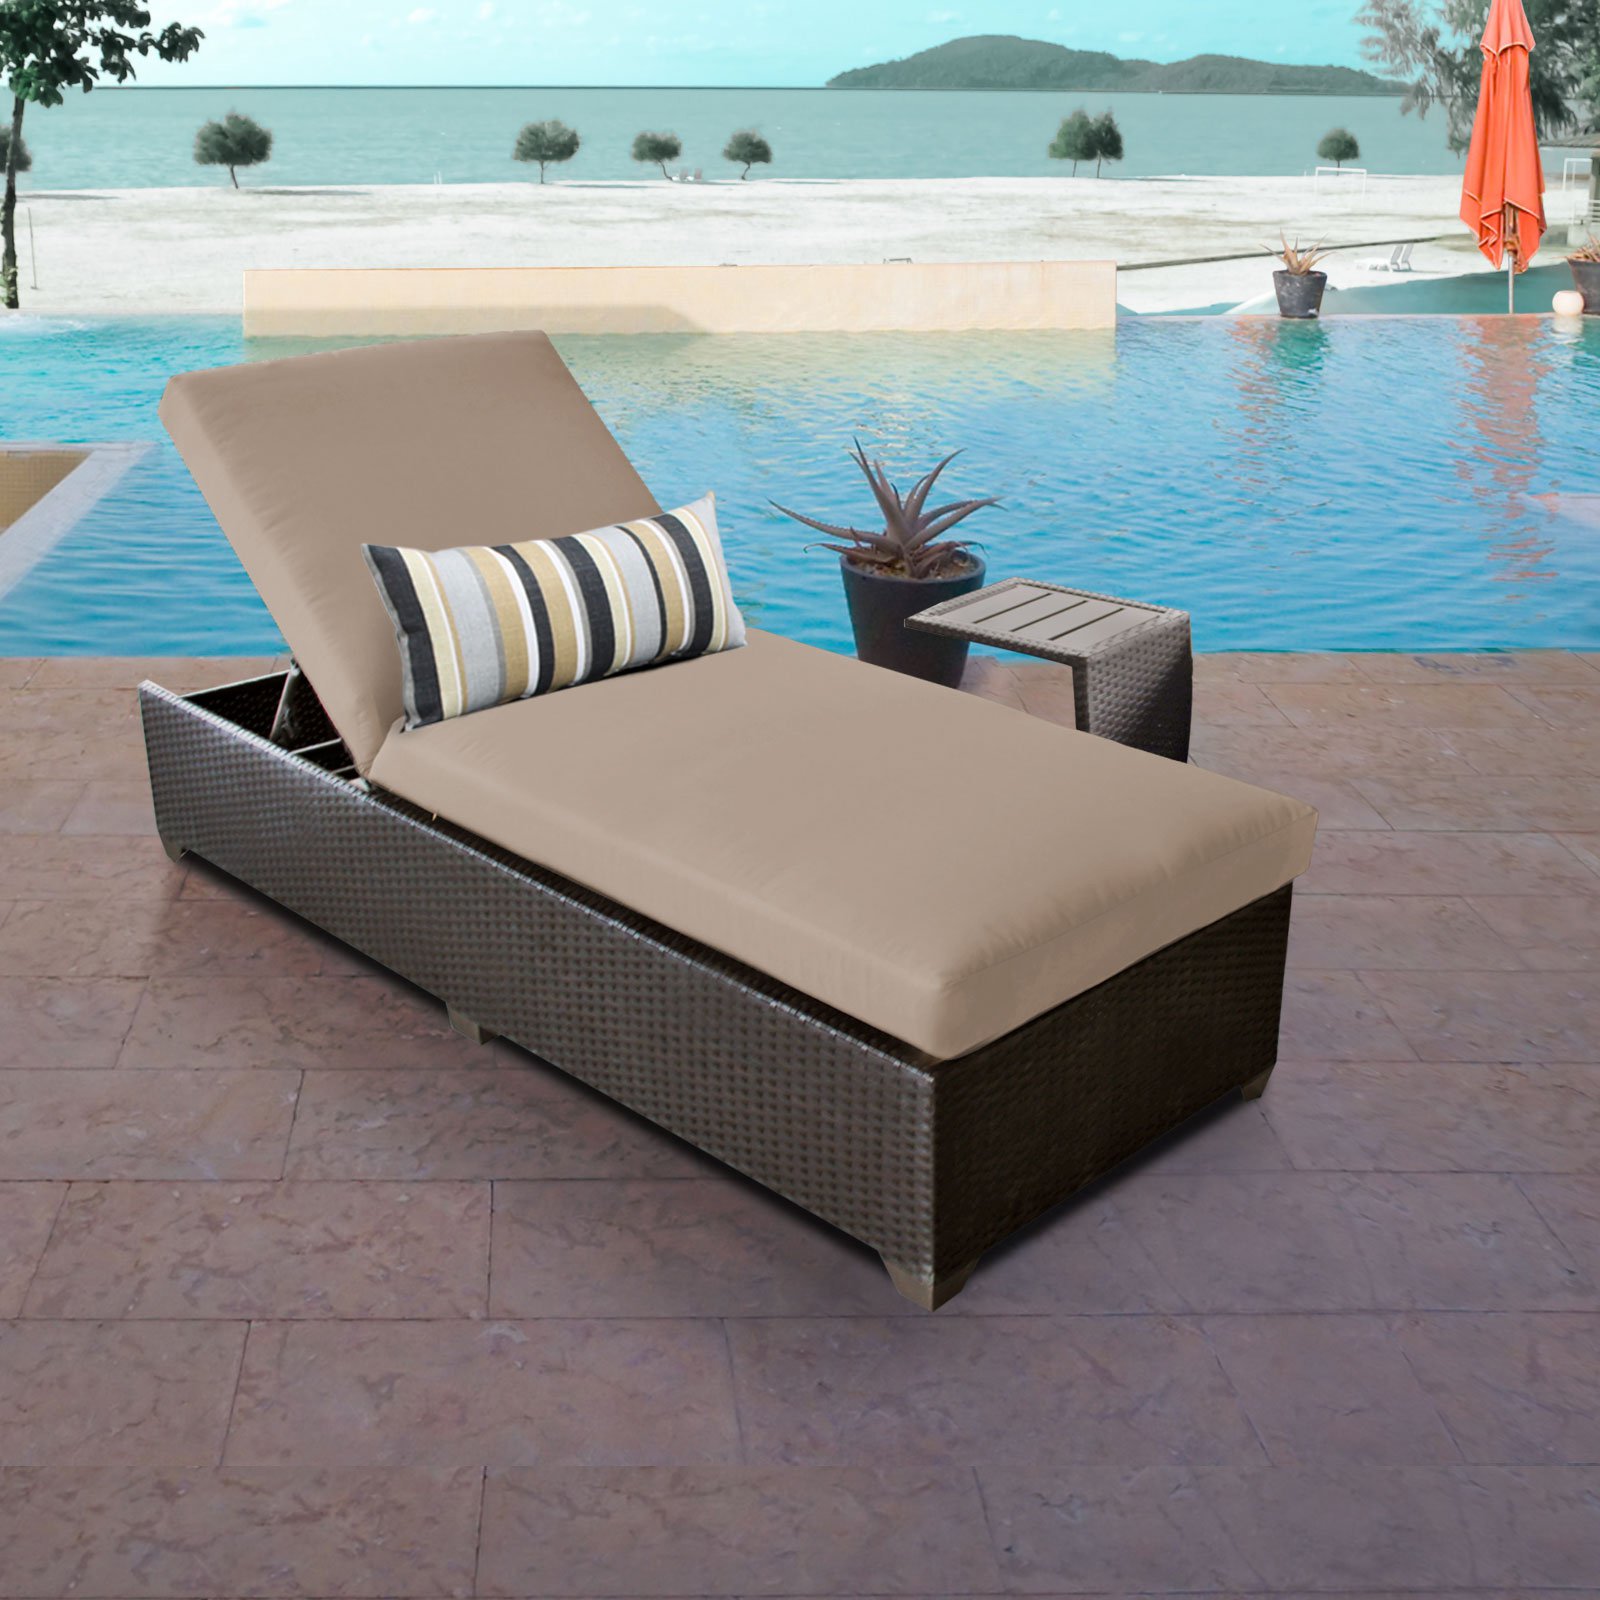 Barbados Chaise Outdoor Wicker Patio Furniture with Side Table in Cilantro - image 5 of 10